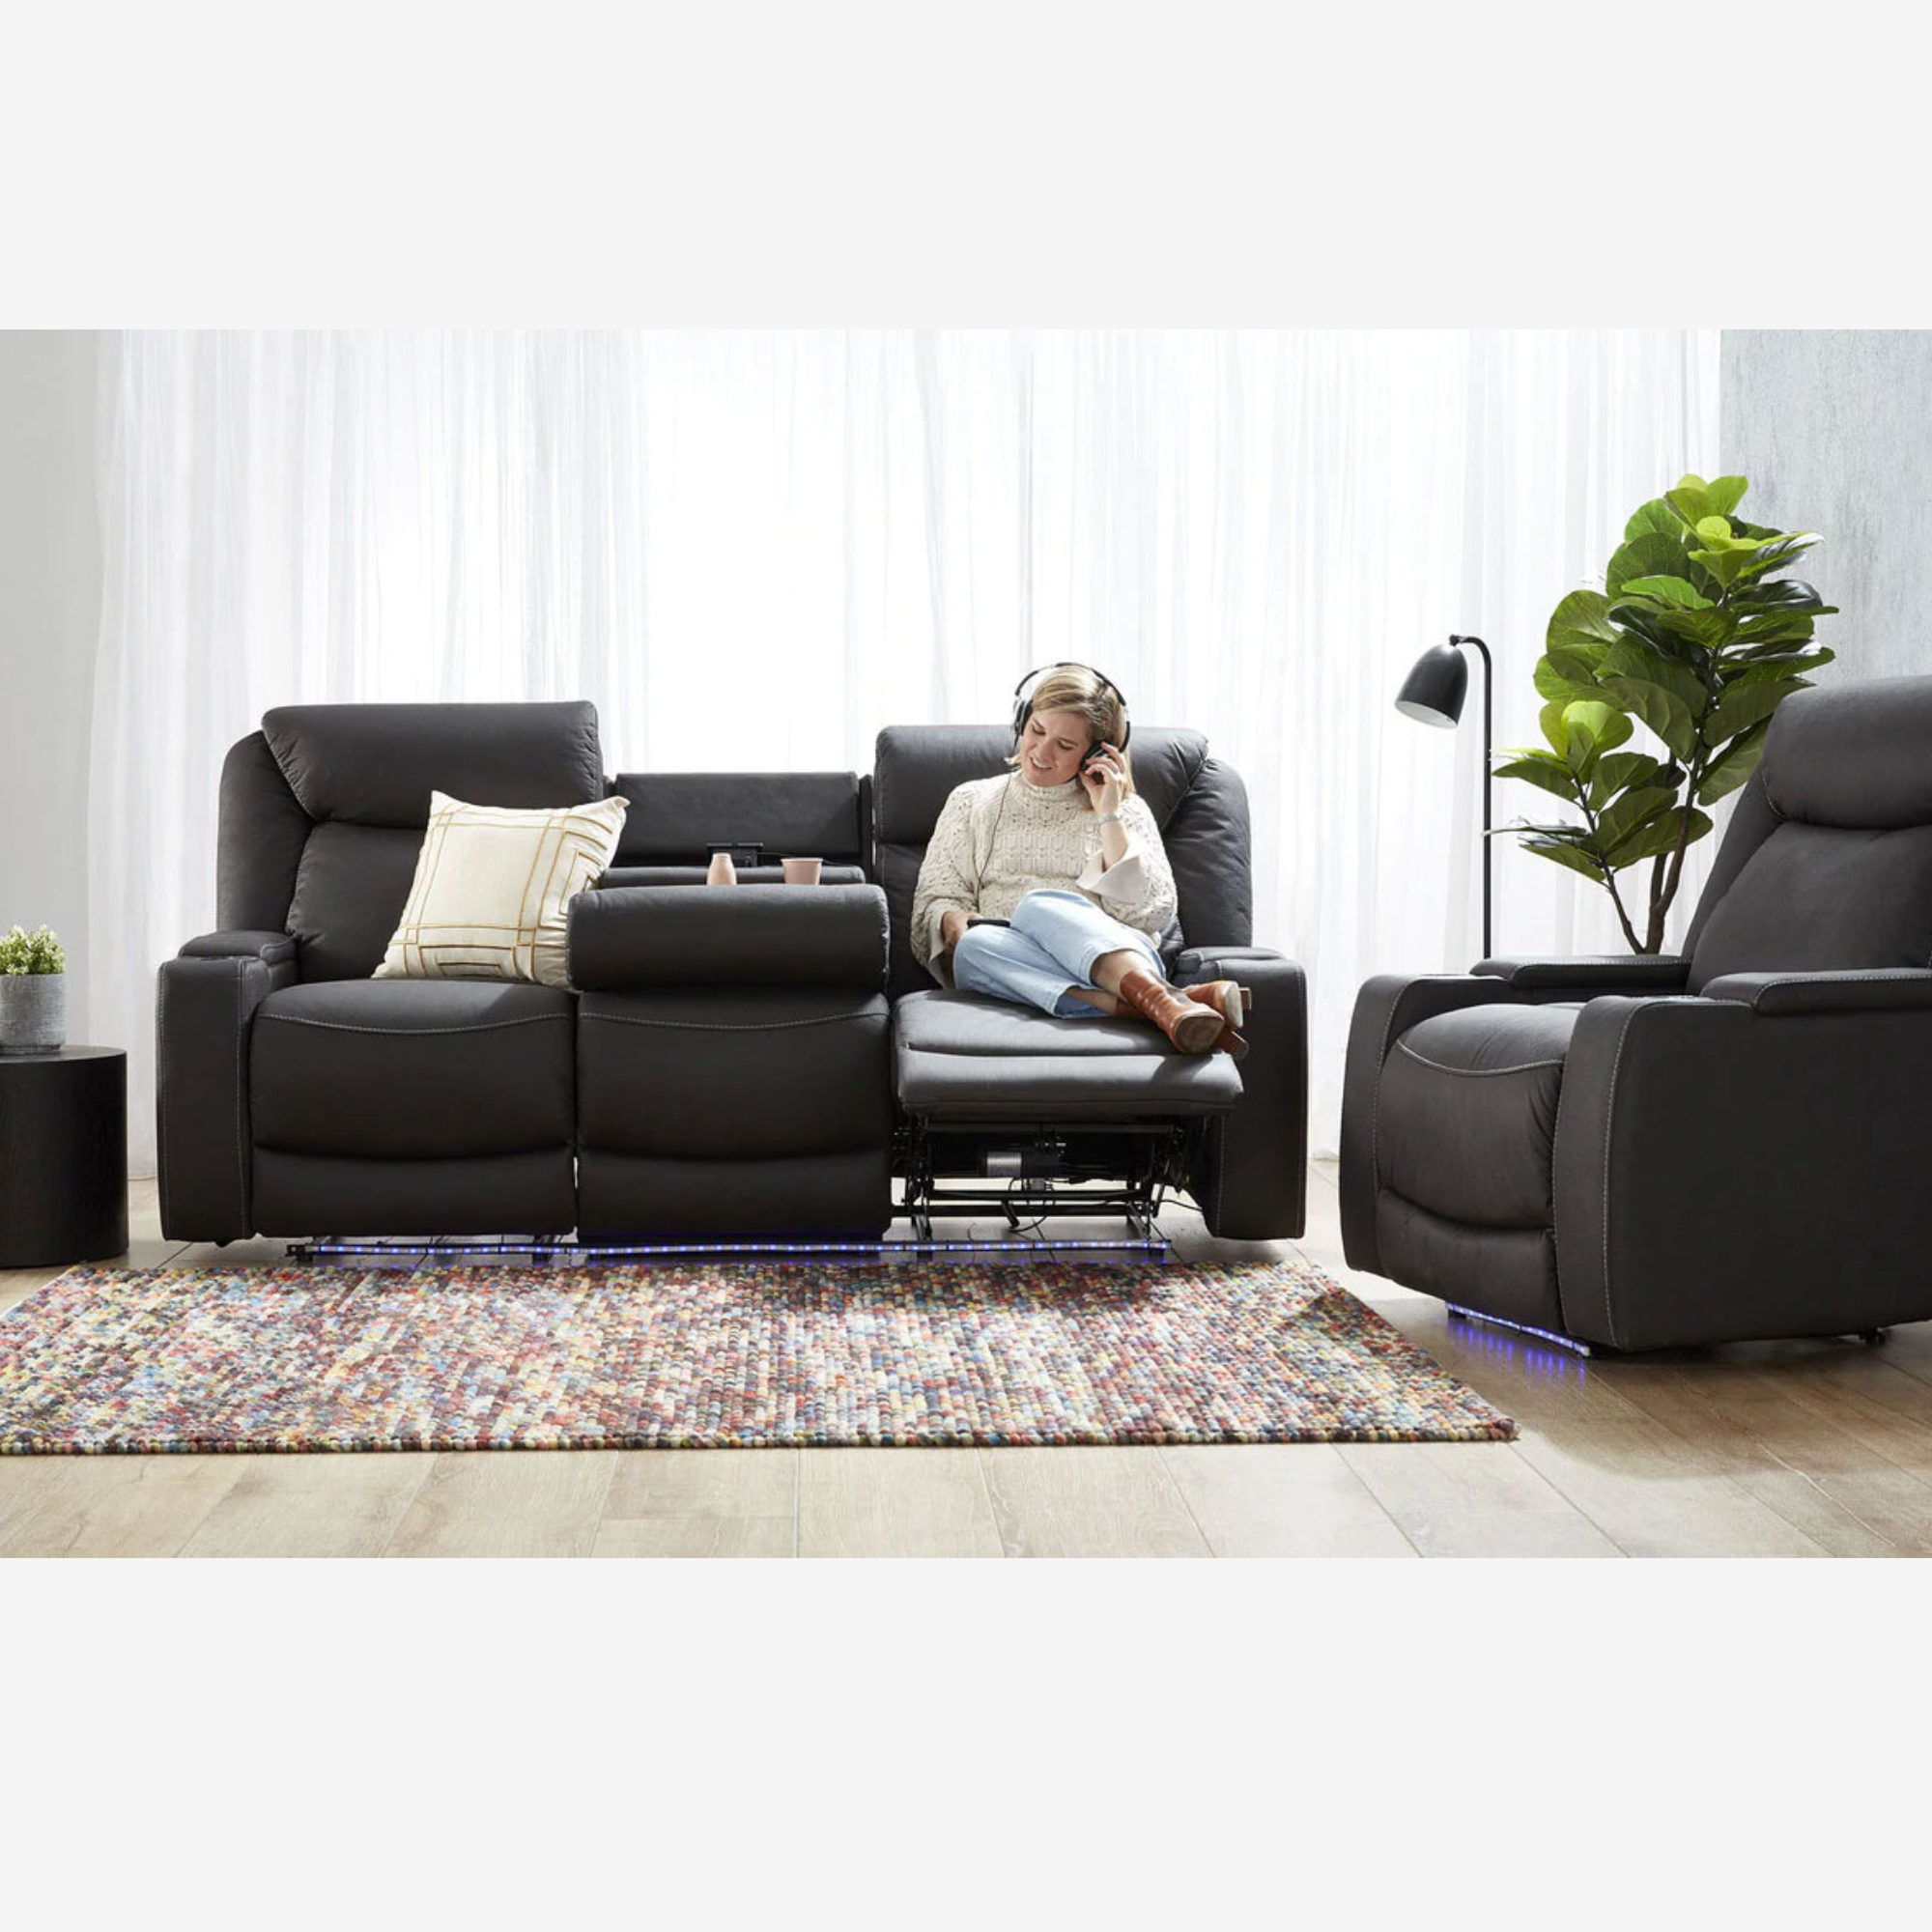 EXCALIBUR SUPER SUEDE ELECTRIC 3 SEATER or 2 SEATER or RECLINER - EACH PIECE SOLD SEPARATELY